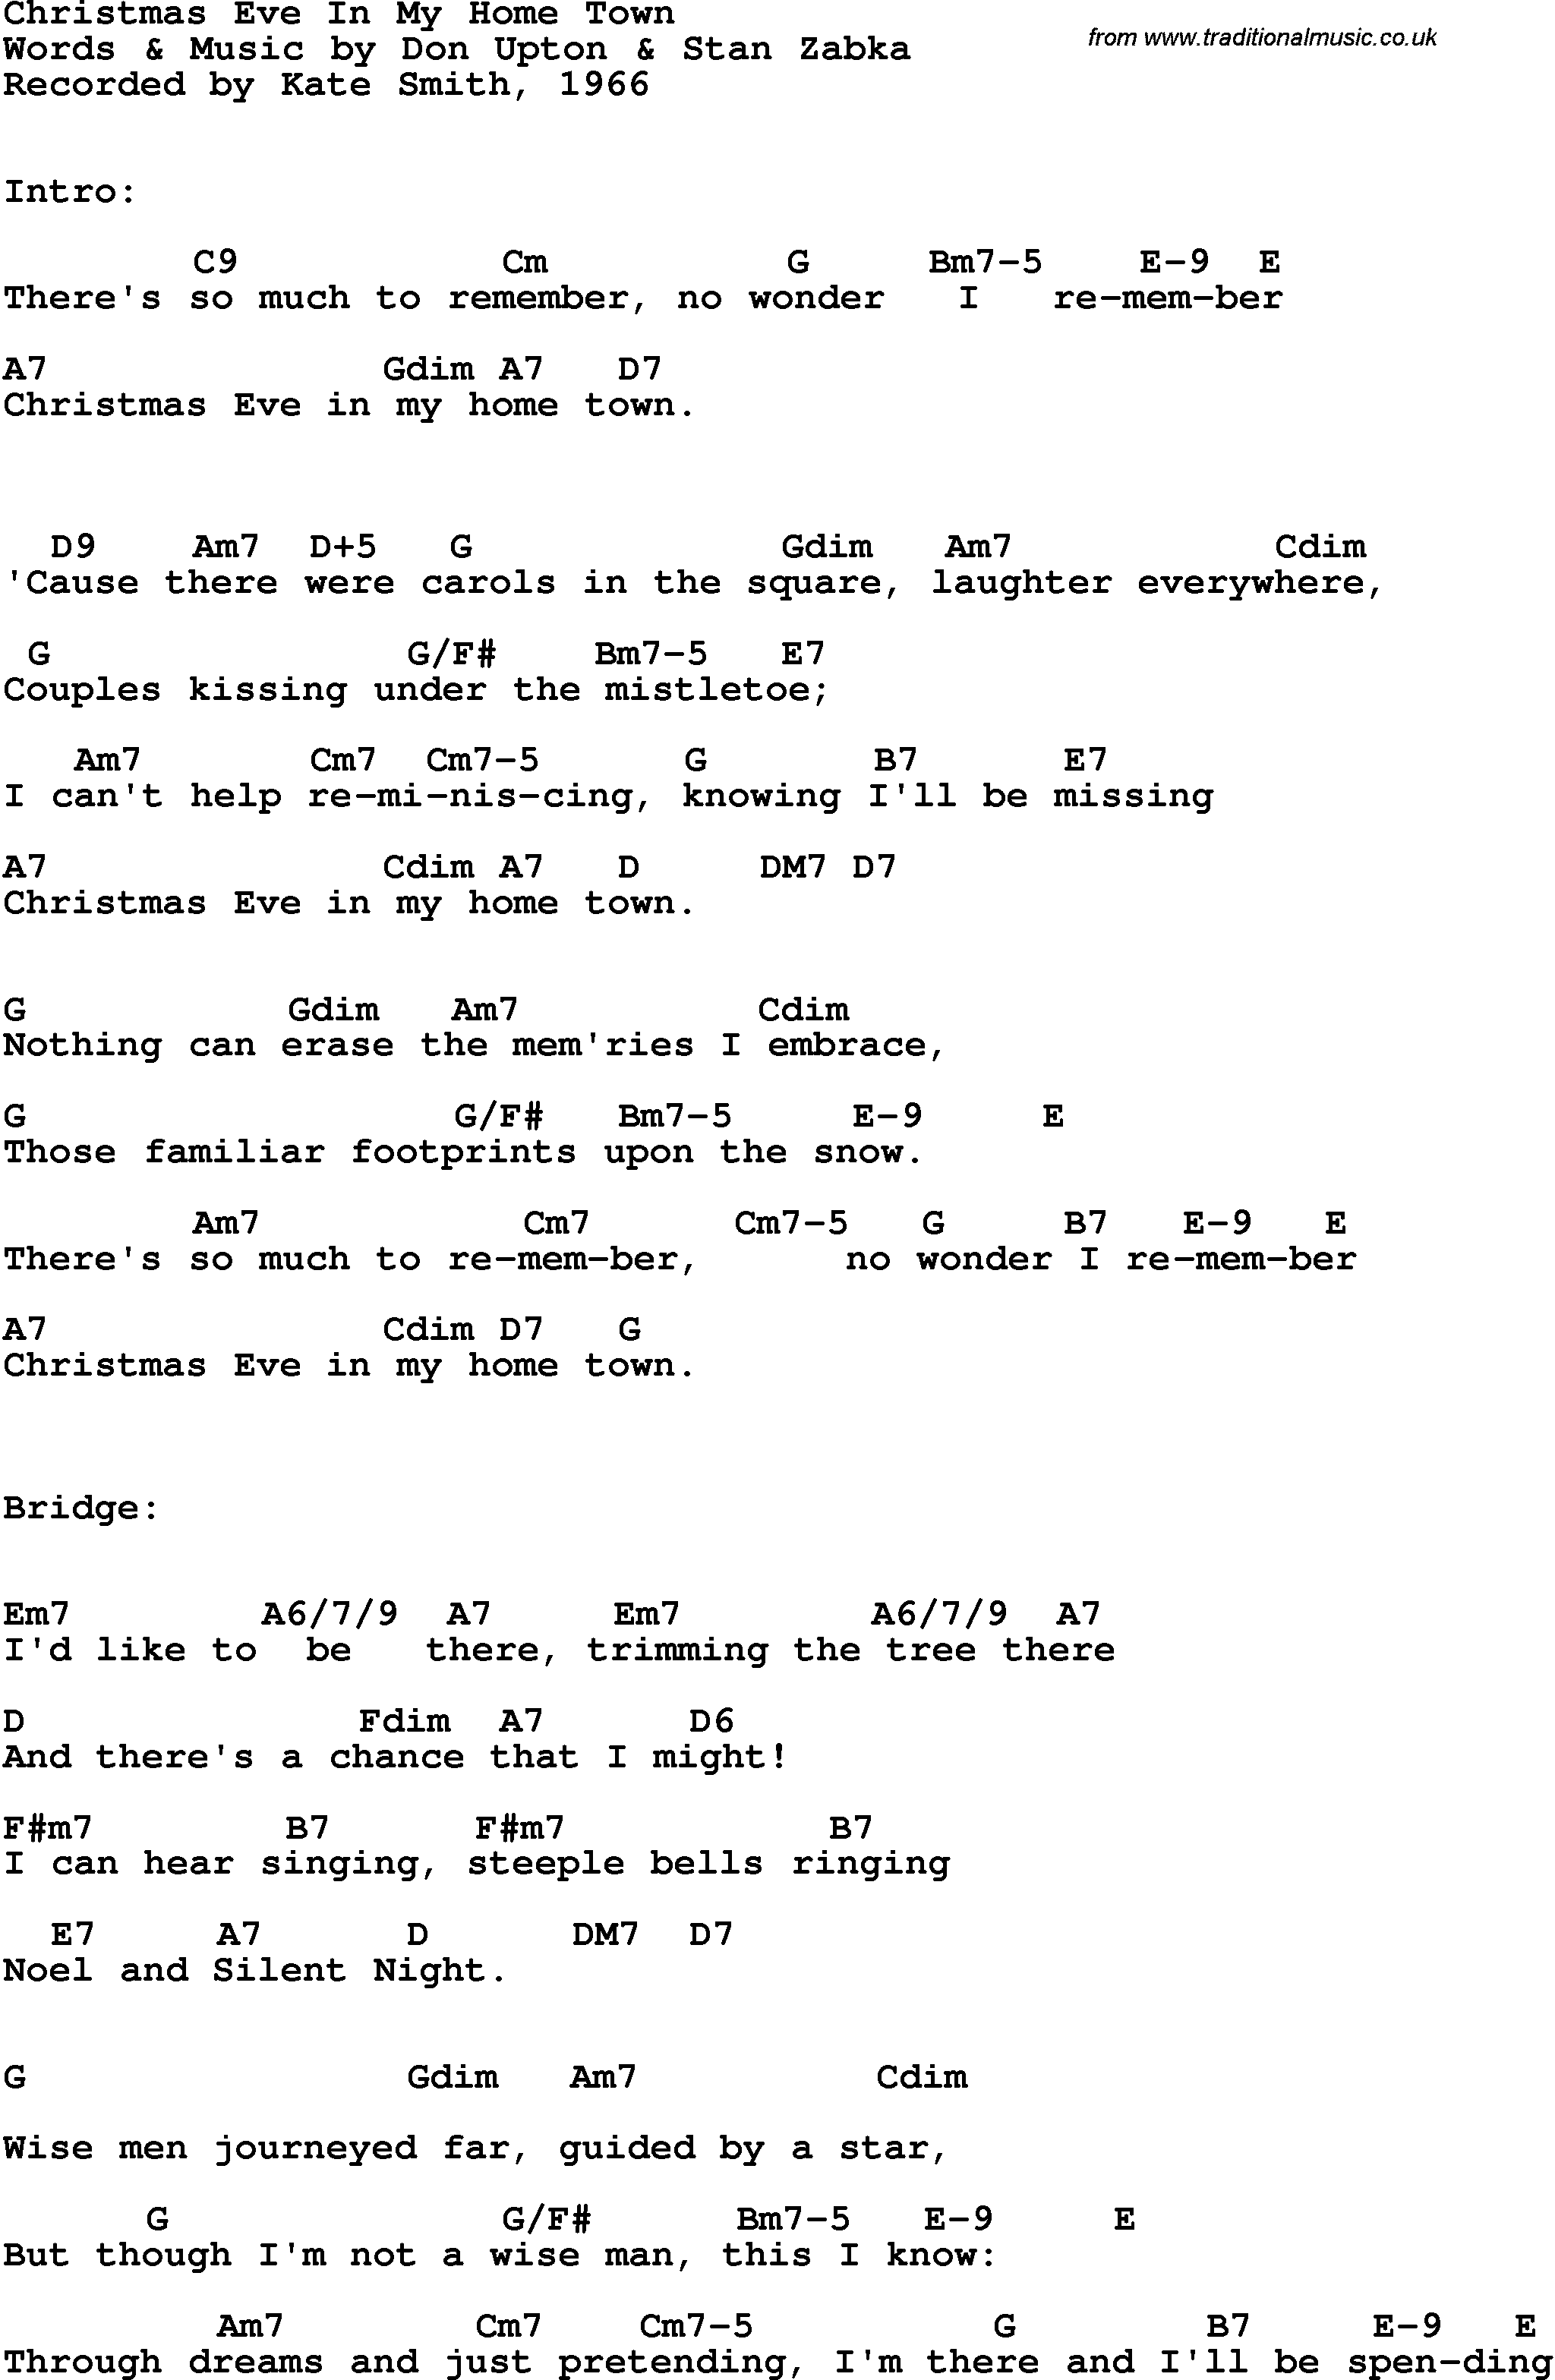 Song Lyrics with guitar chords for Christmas Eve In My Home Town - Kate Smith, 1966